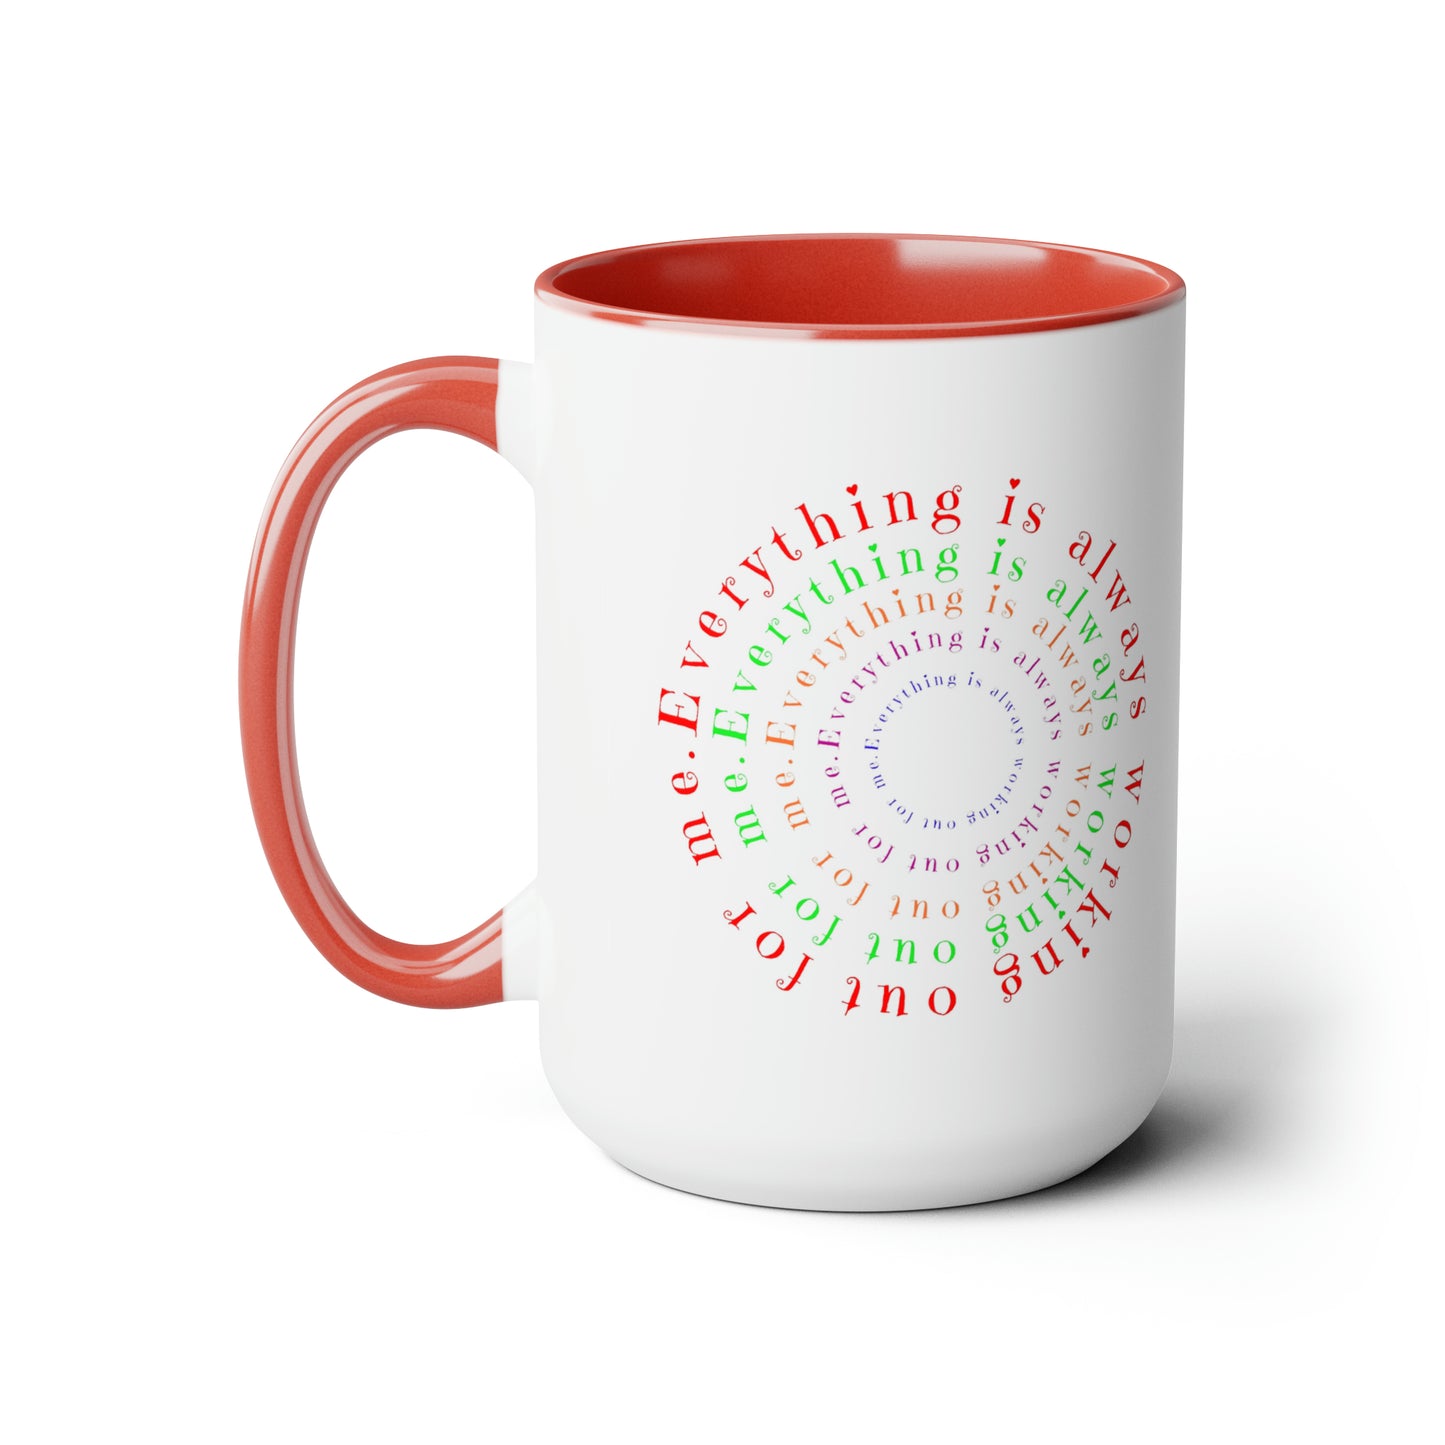 Everything Is Always Working Out For Me - Abraham Hicks Quote Two-Tone Coffee Mugs, 15oz